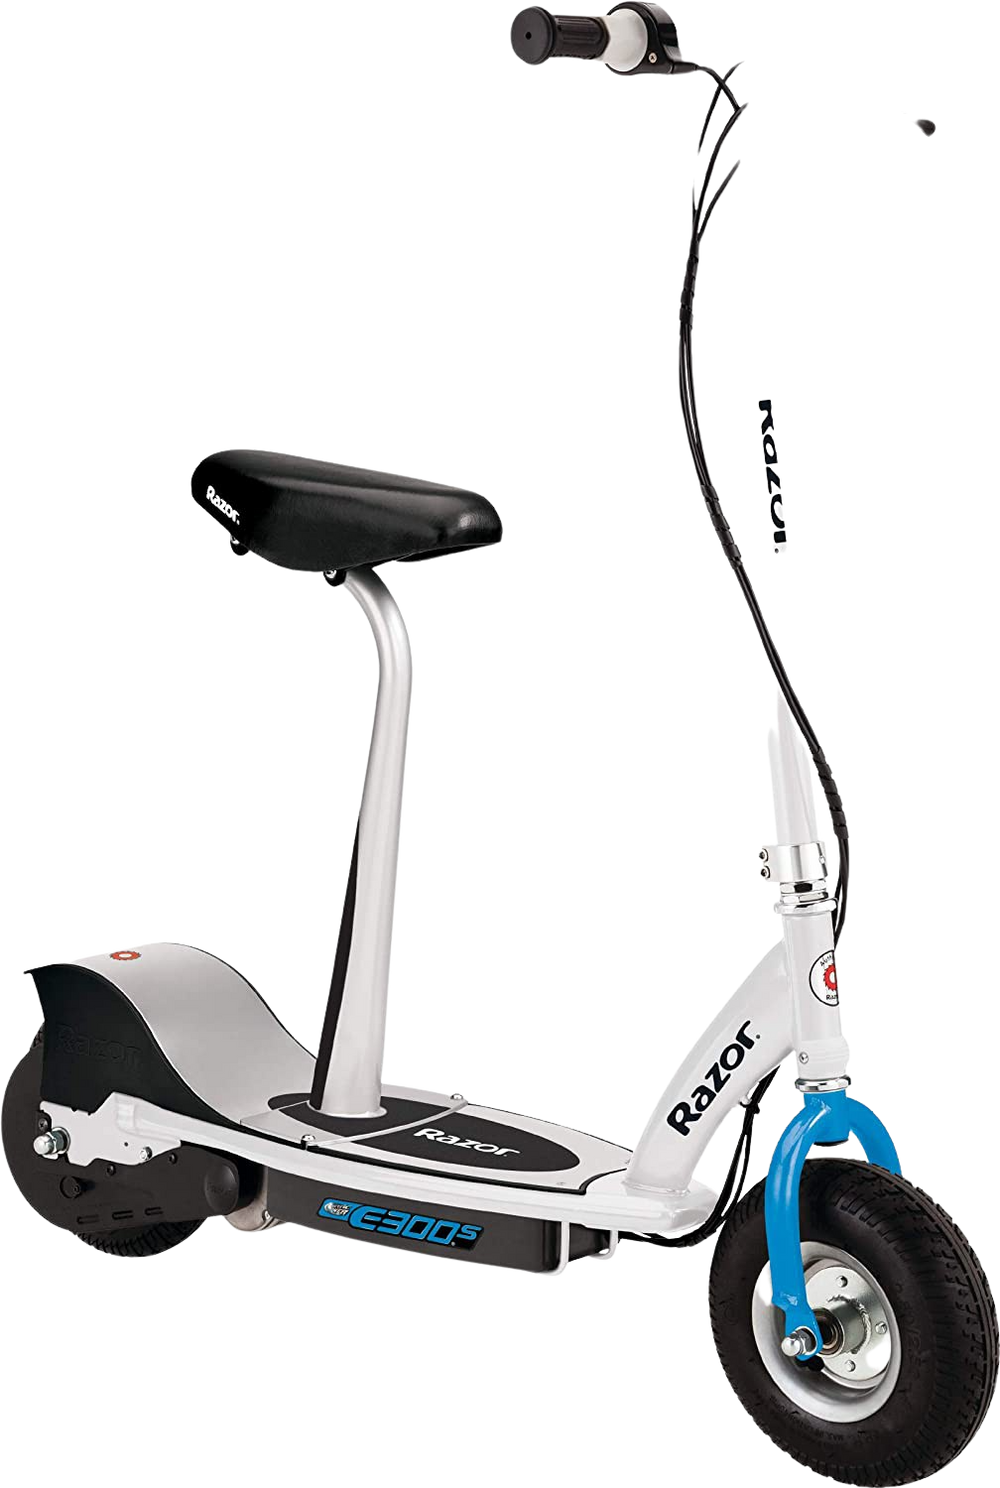 Razor E300 Up to 10 Mile Range 15 MPH 9" Tires Electric Scooter Blue White New